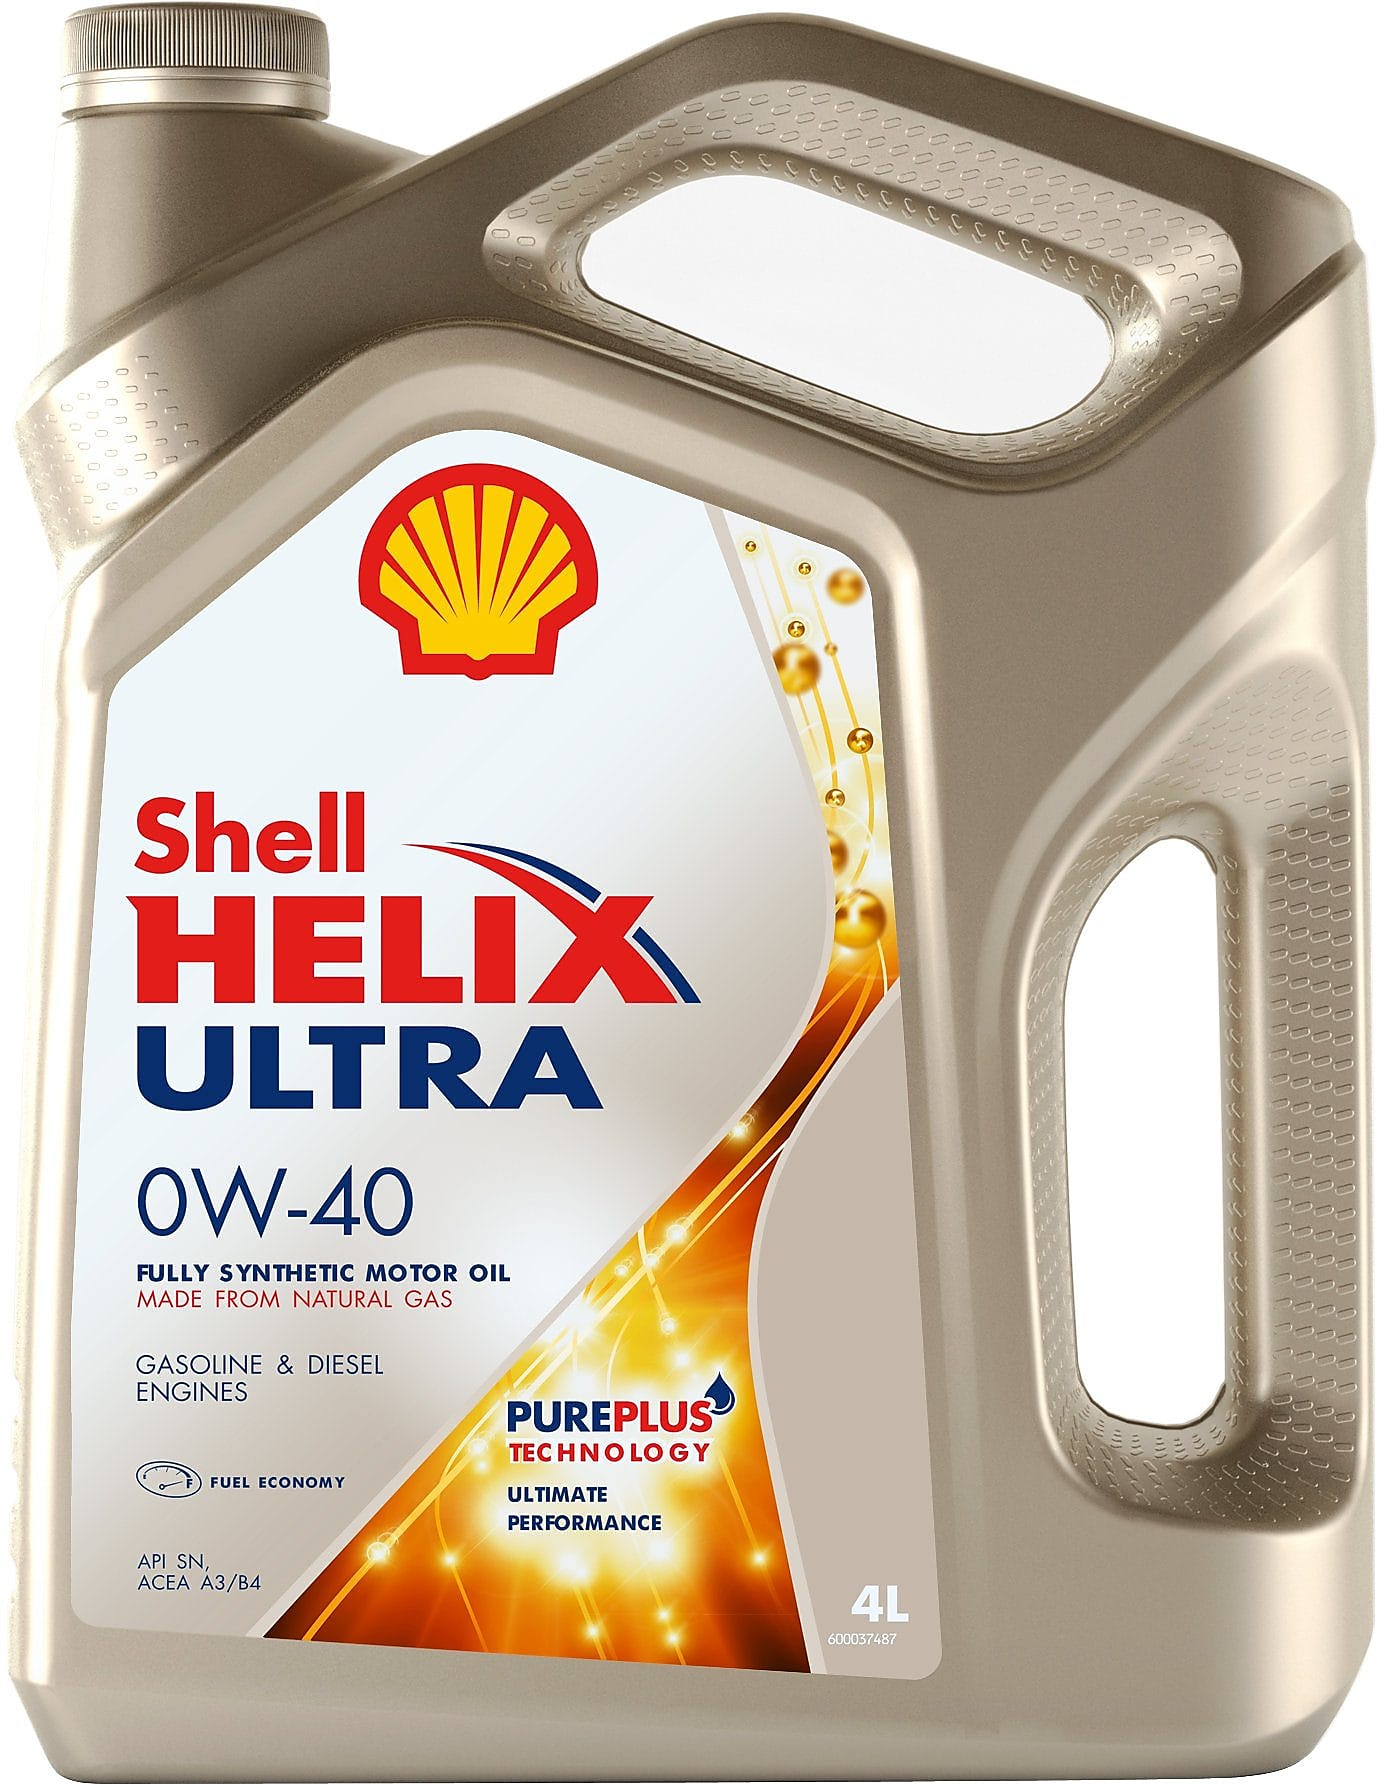 Моторное масло Shell Helix Ultra 0W-40, 550046370, 4л